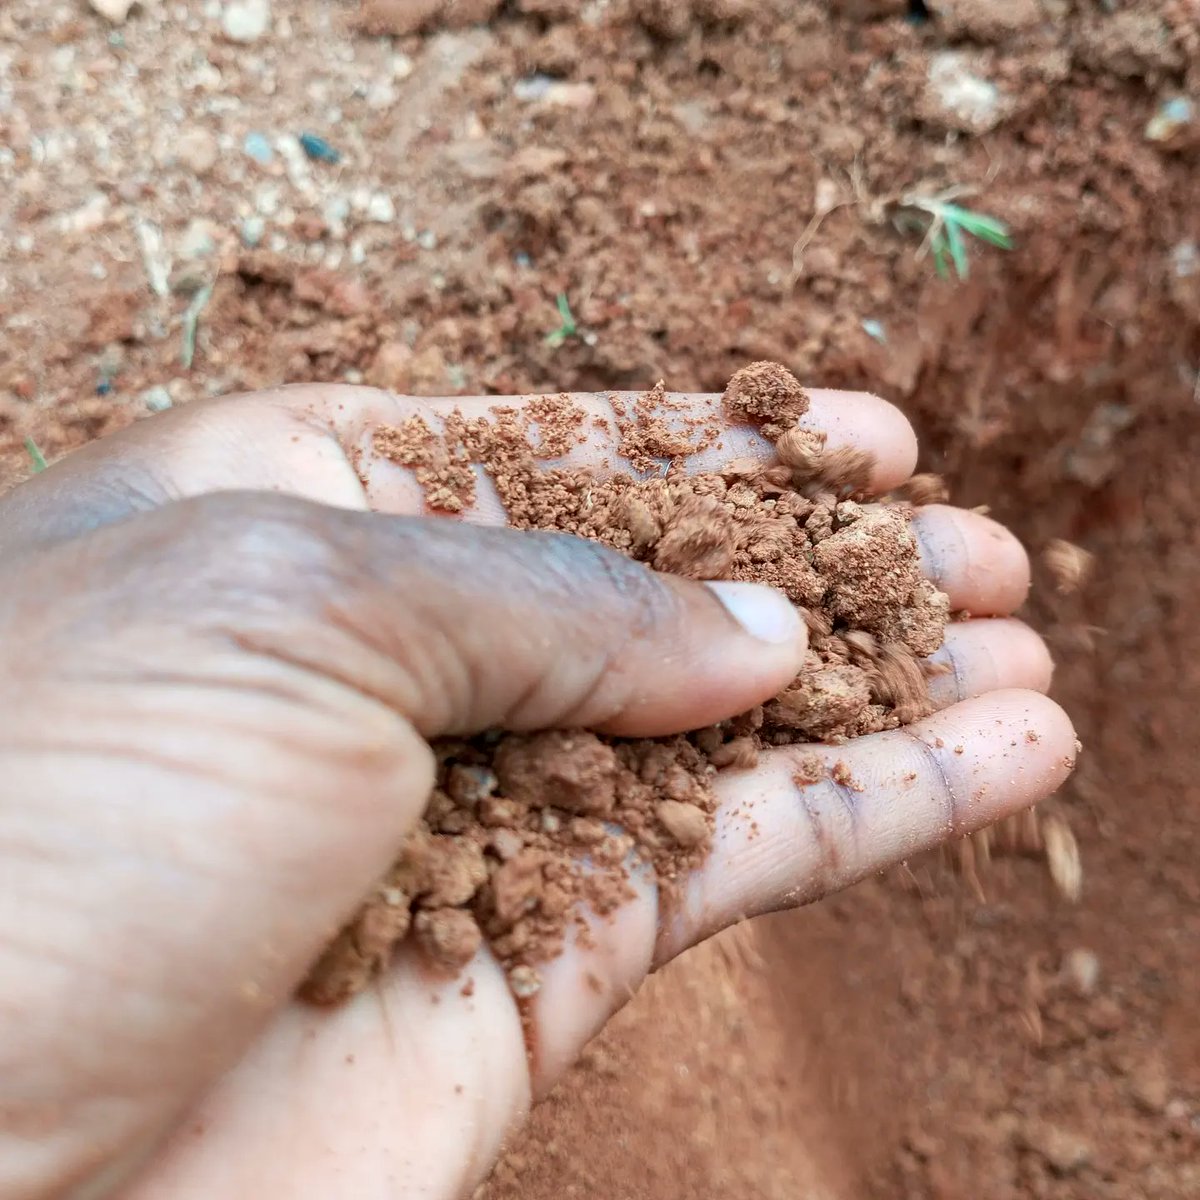 Reveal the secrets under your construction site with these Five (5) key details: #soiltexture #color #moisture #composition #structure By logging these factors during soil analysis, we gain valuable insights guiding construction decisions. +256770836731 #geotechnicalengineering